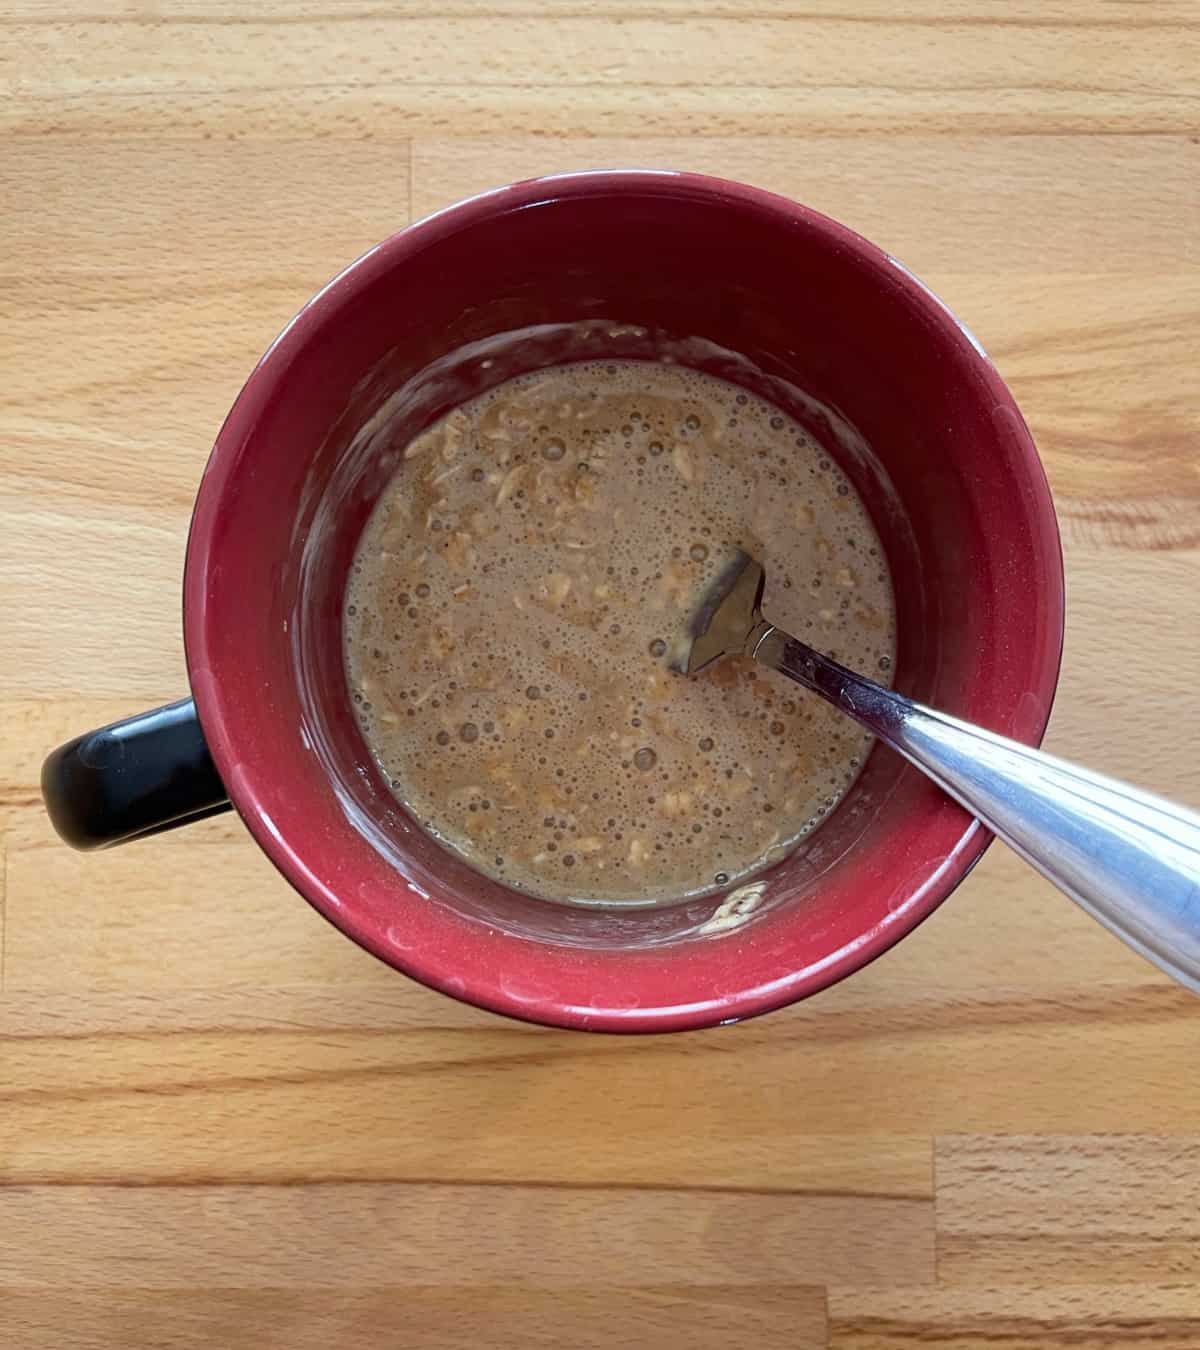 Mixing oatmeal raisin muffin ingredients in red mug with fork.